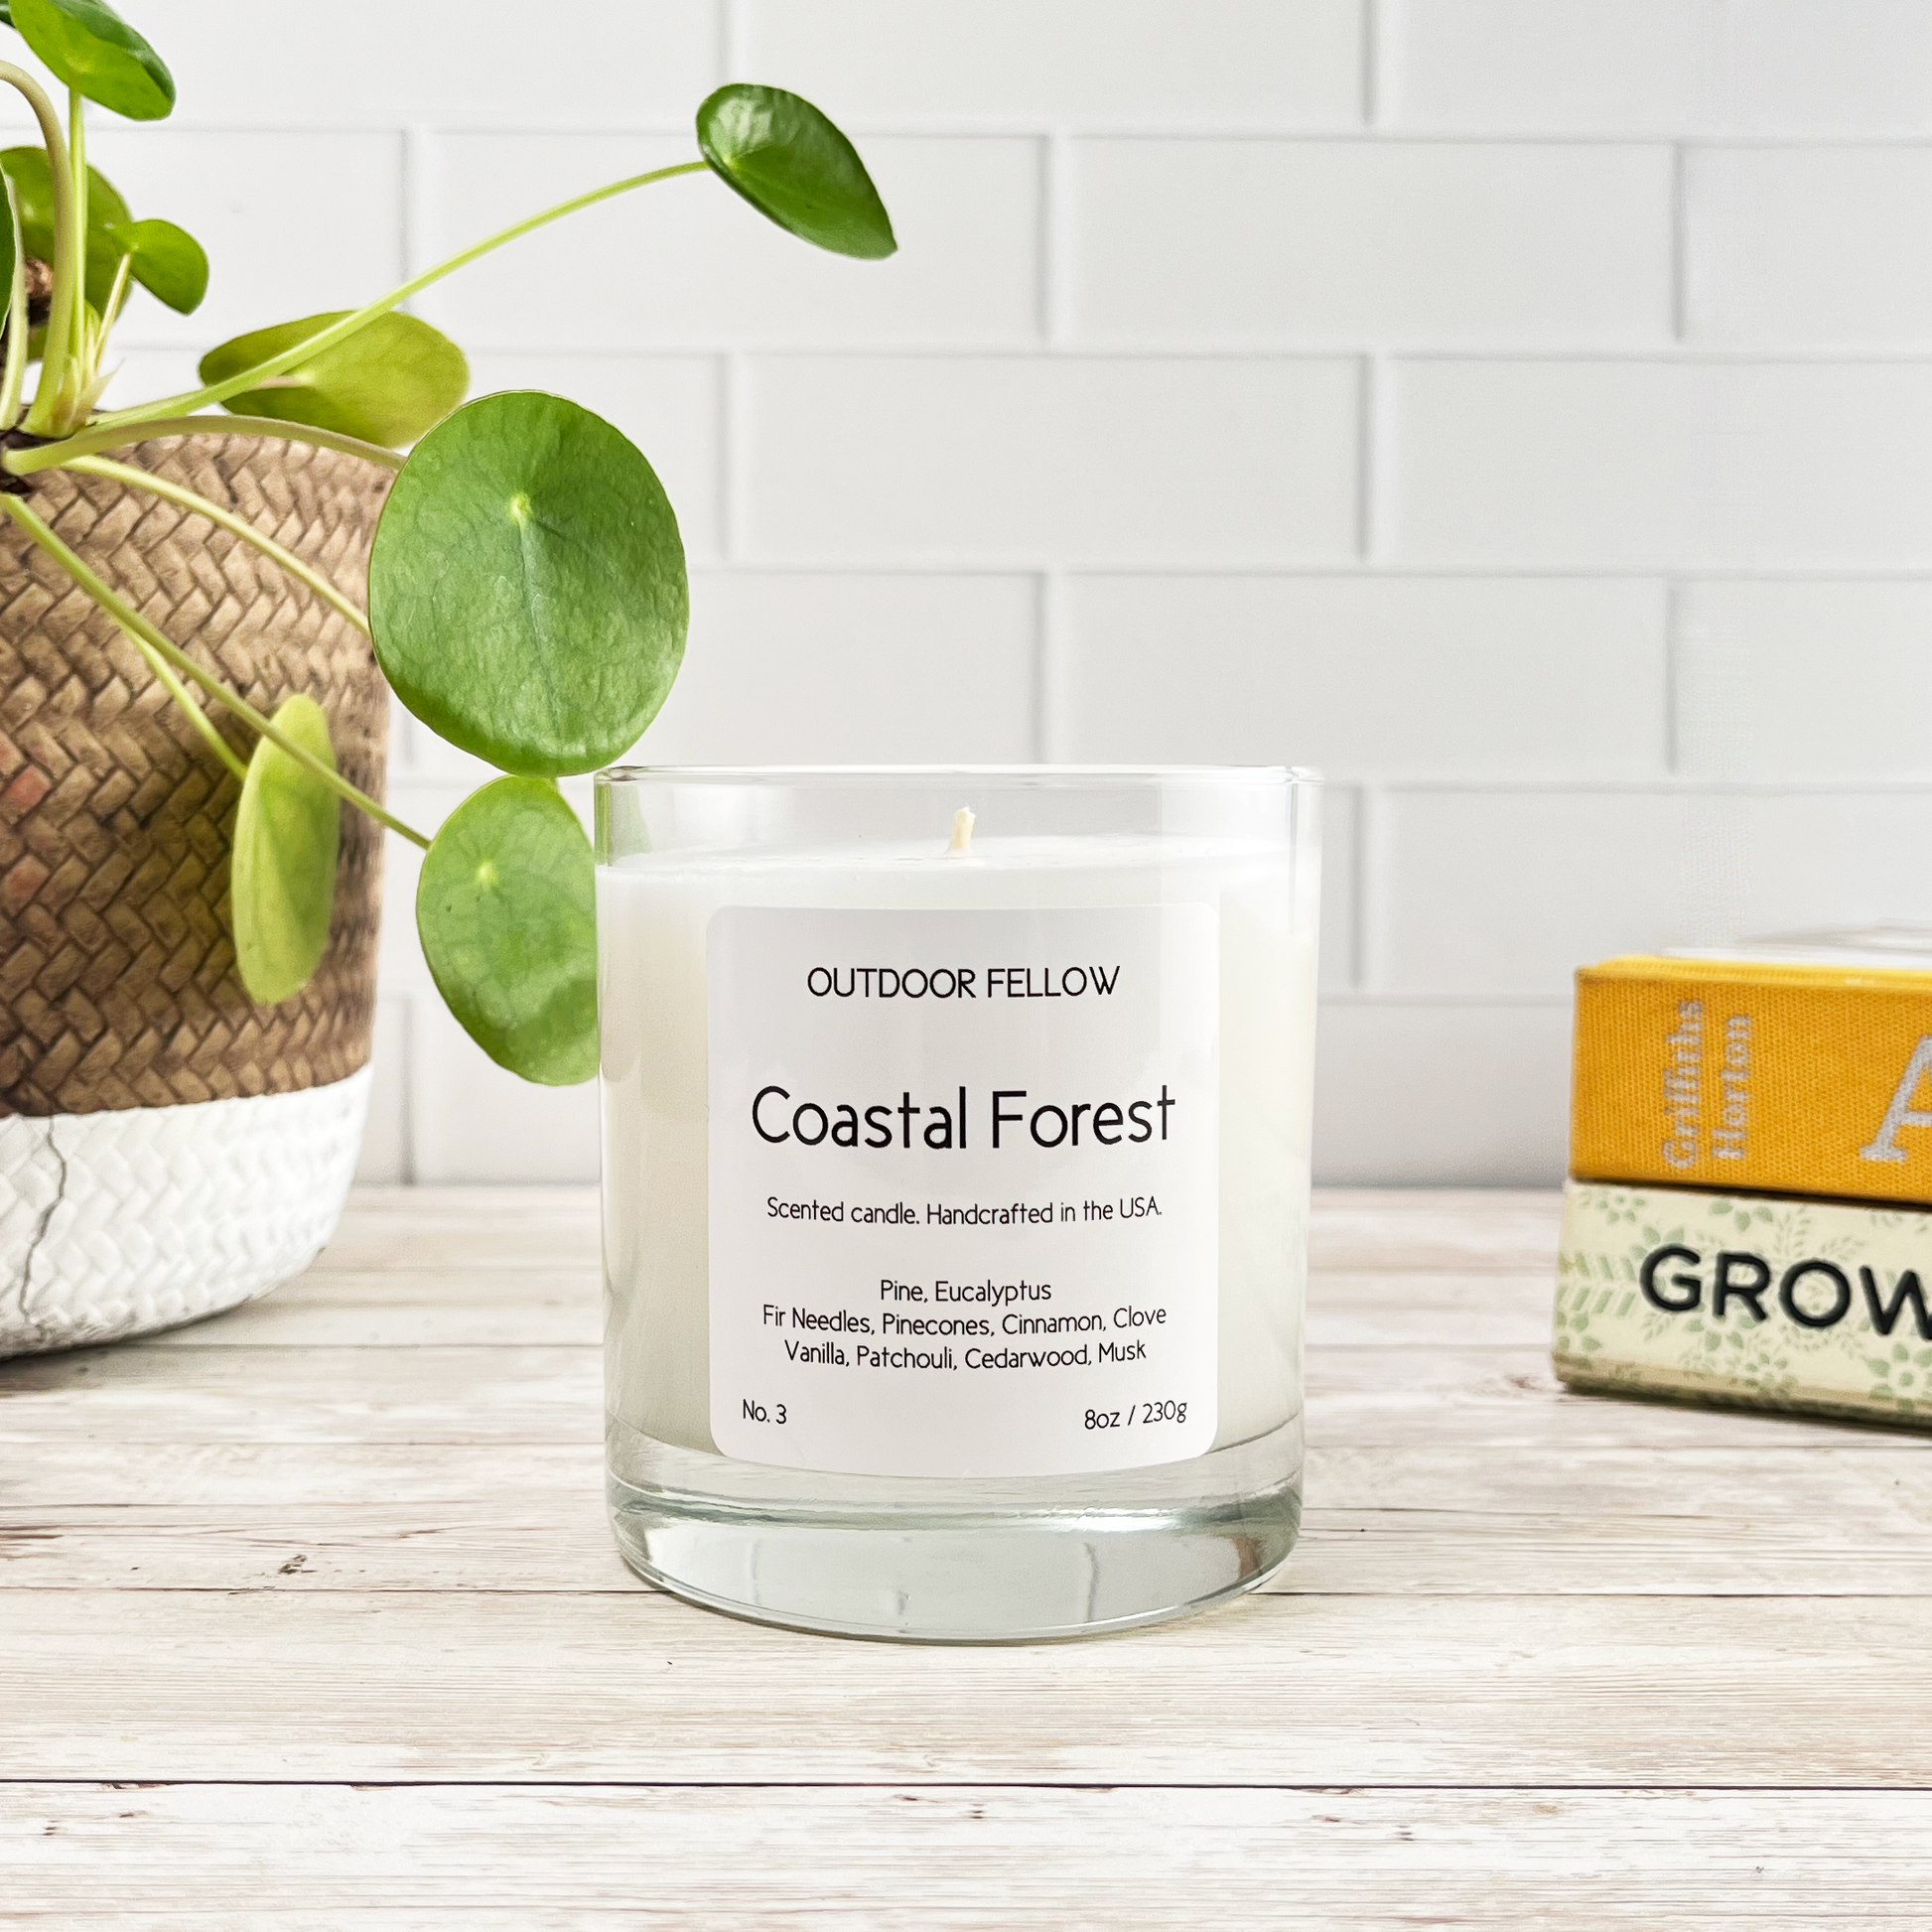 Coastal Forest scented candle